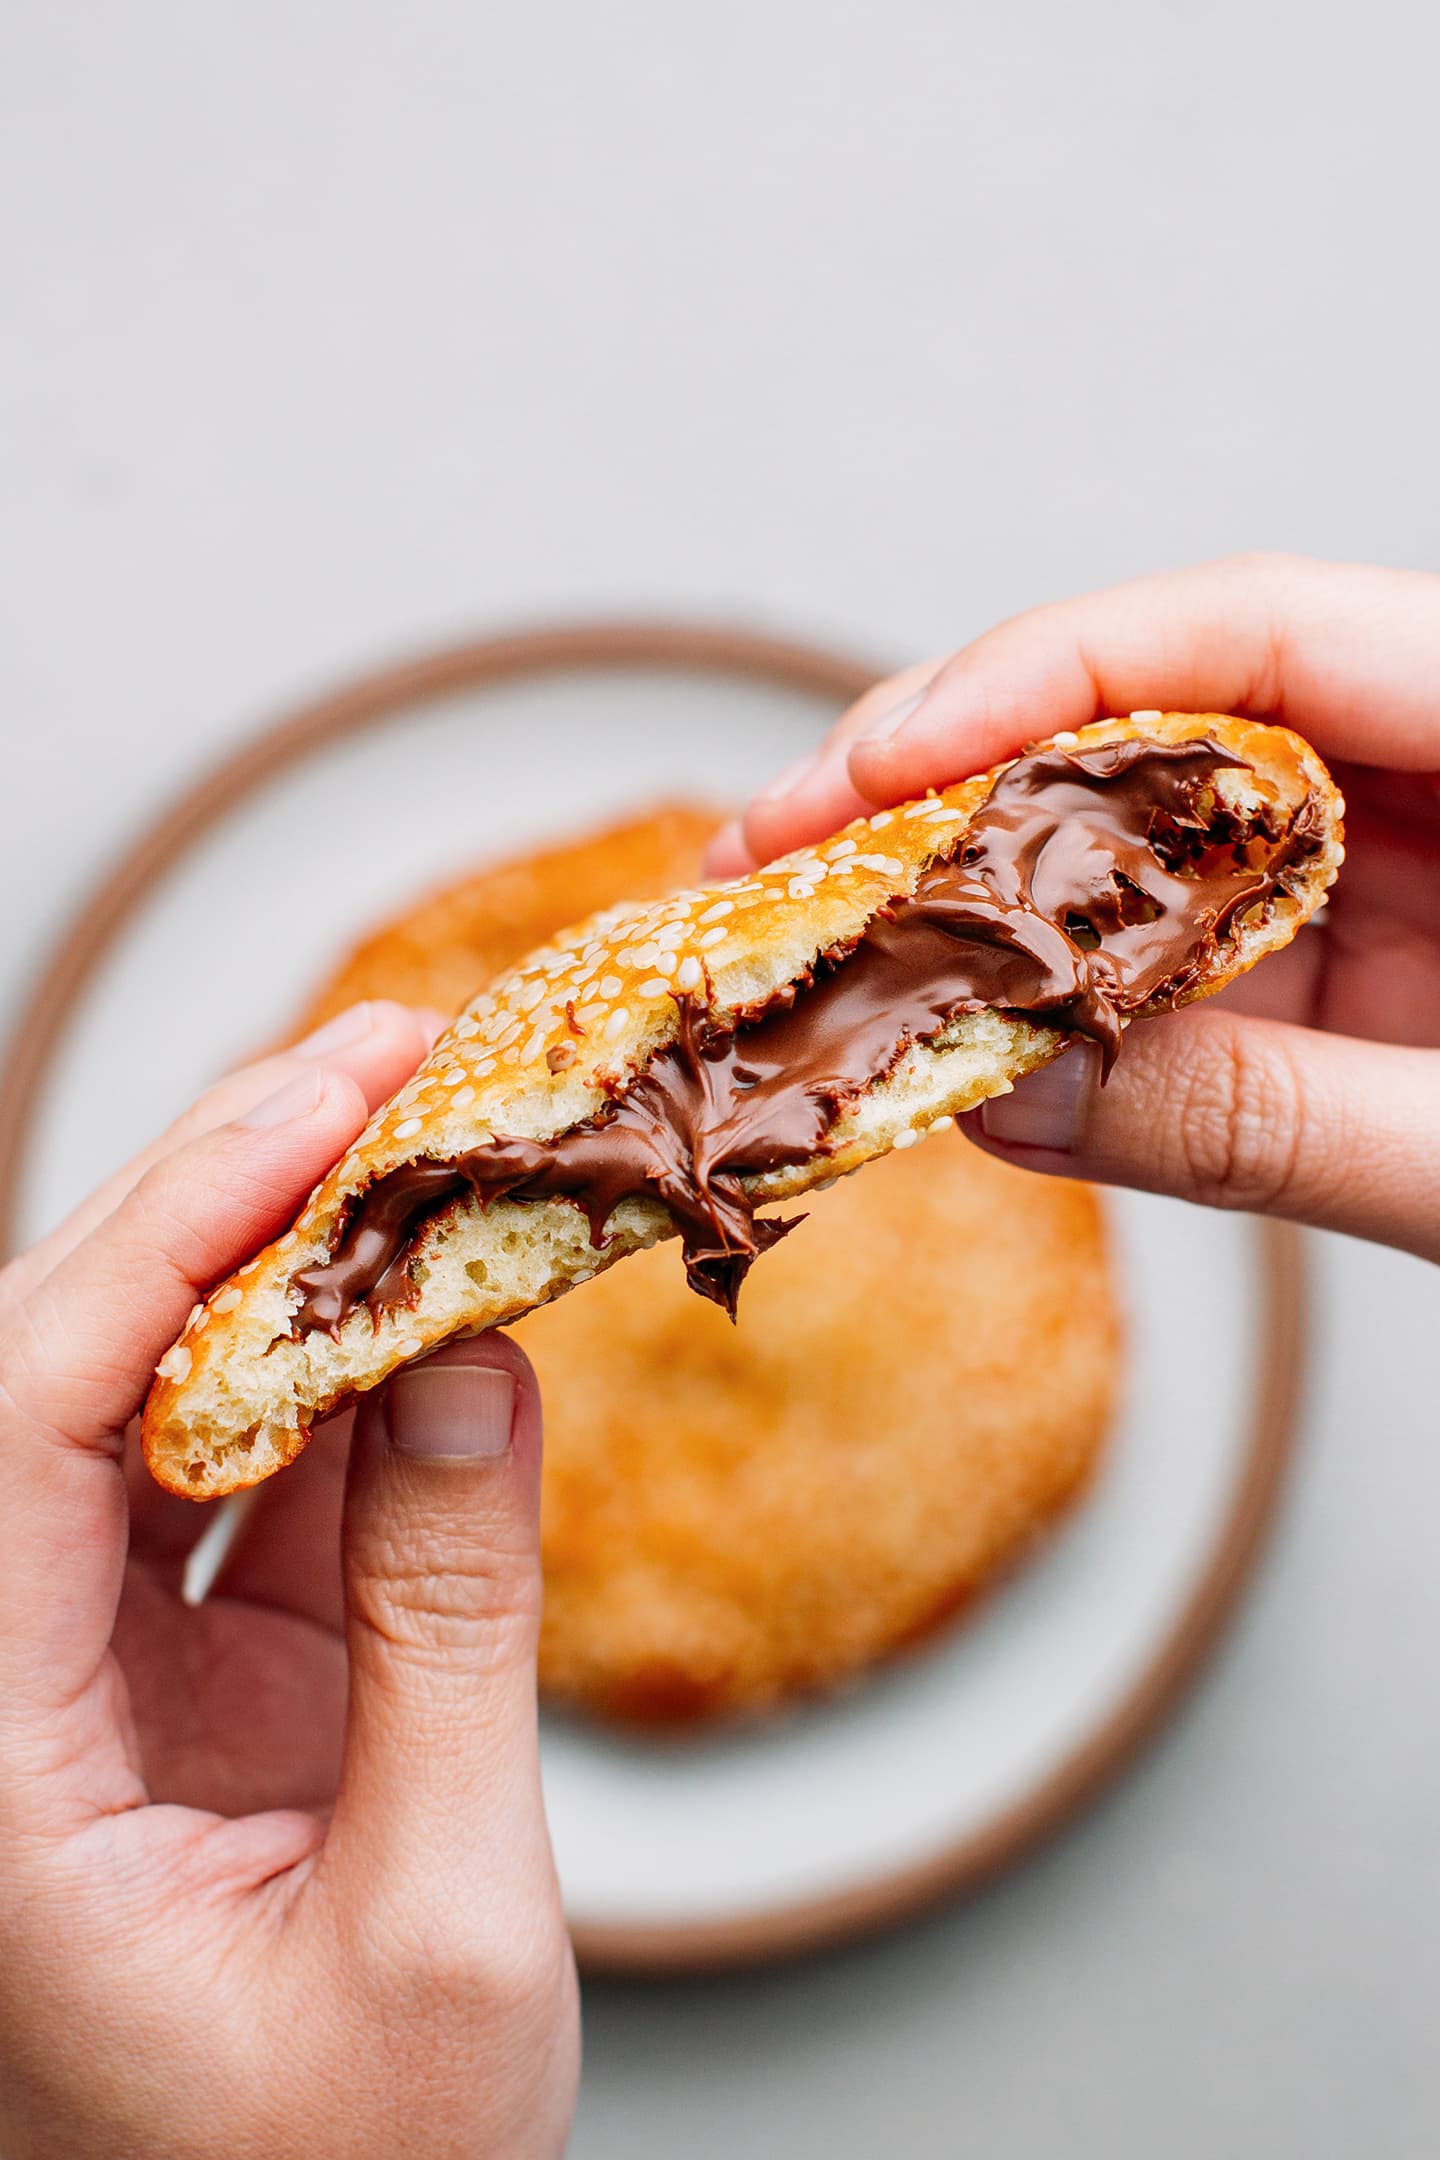 Holding sesame donut filled with chocolate spread.